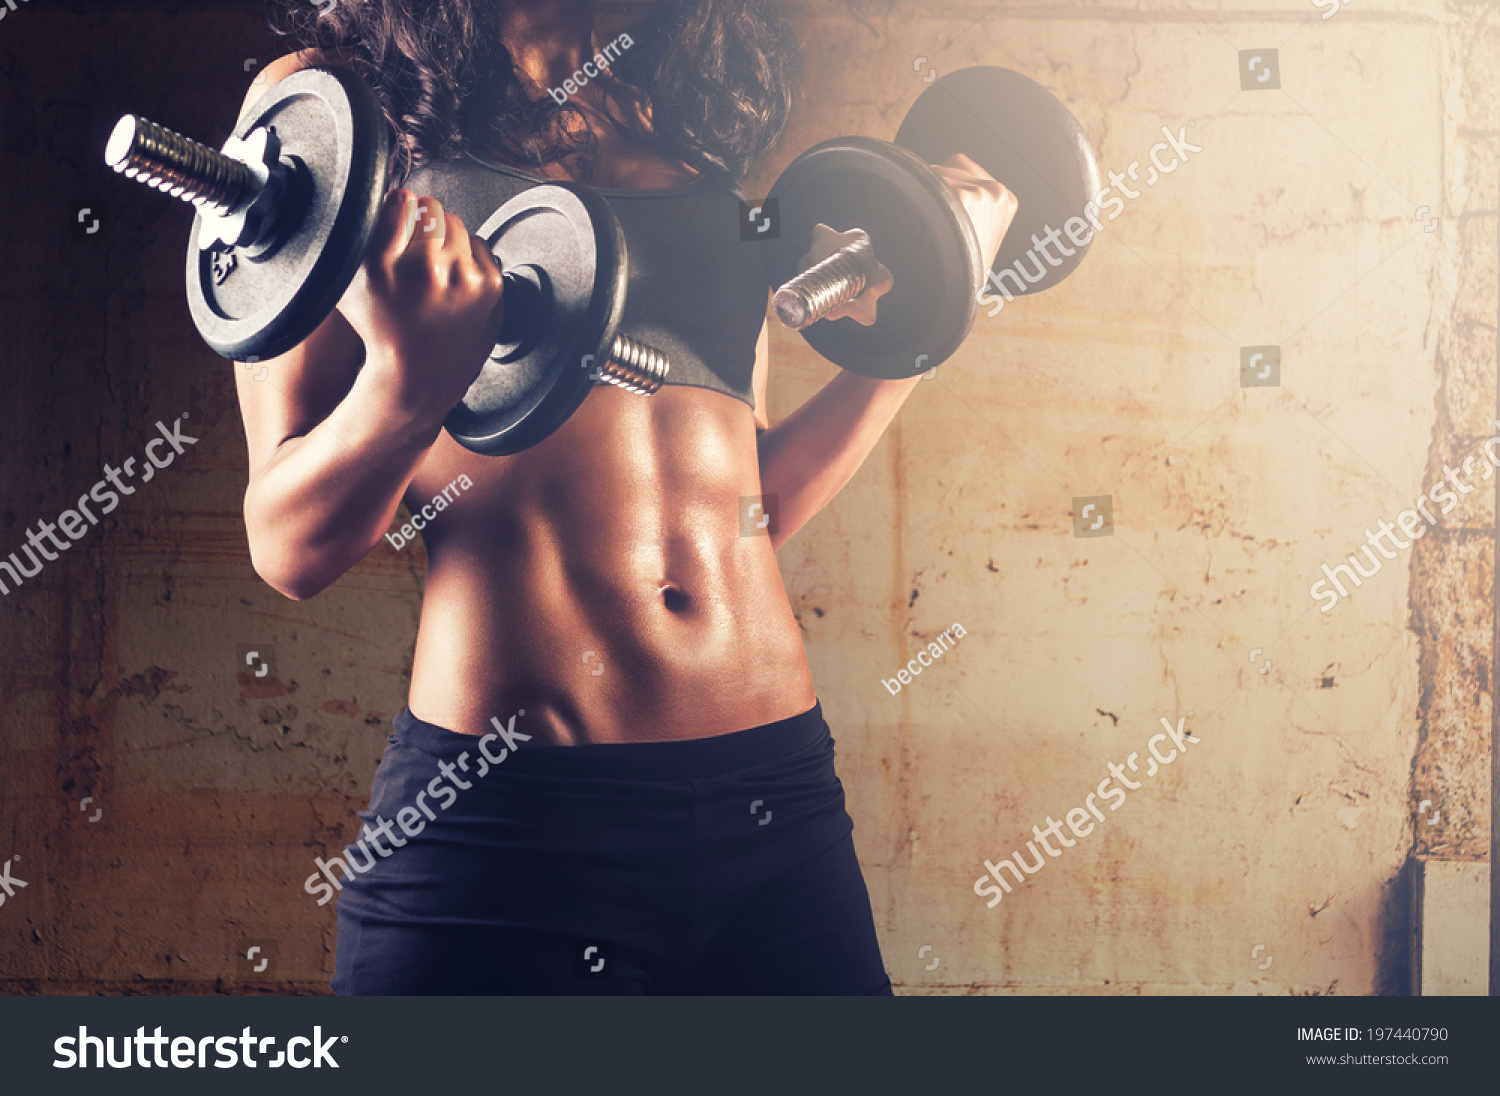 Fitness woman in training.Strong abs showing #197440790